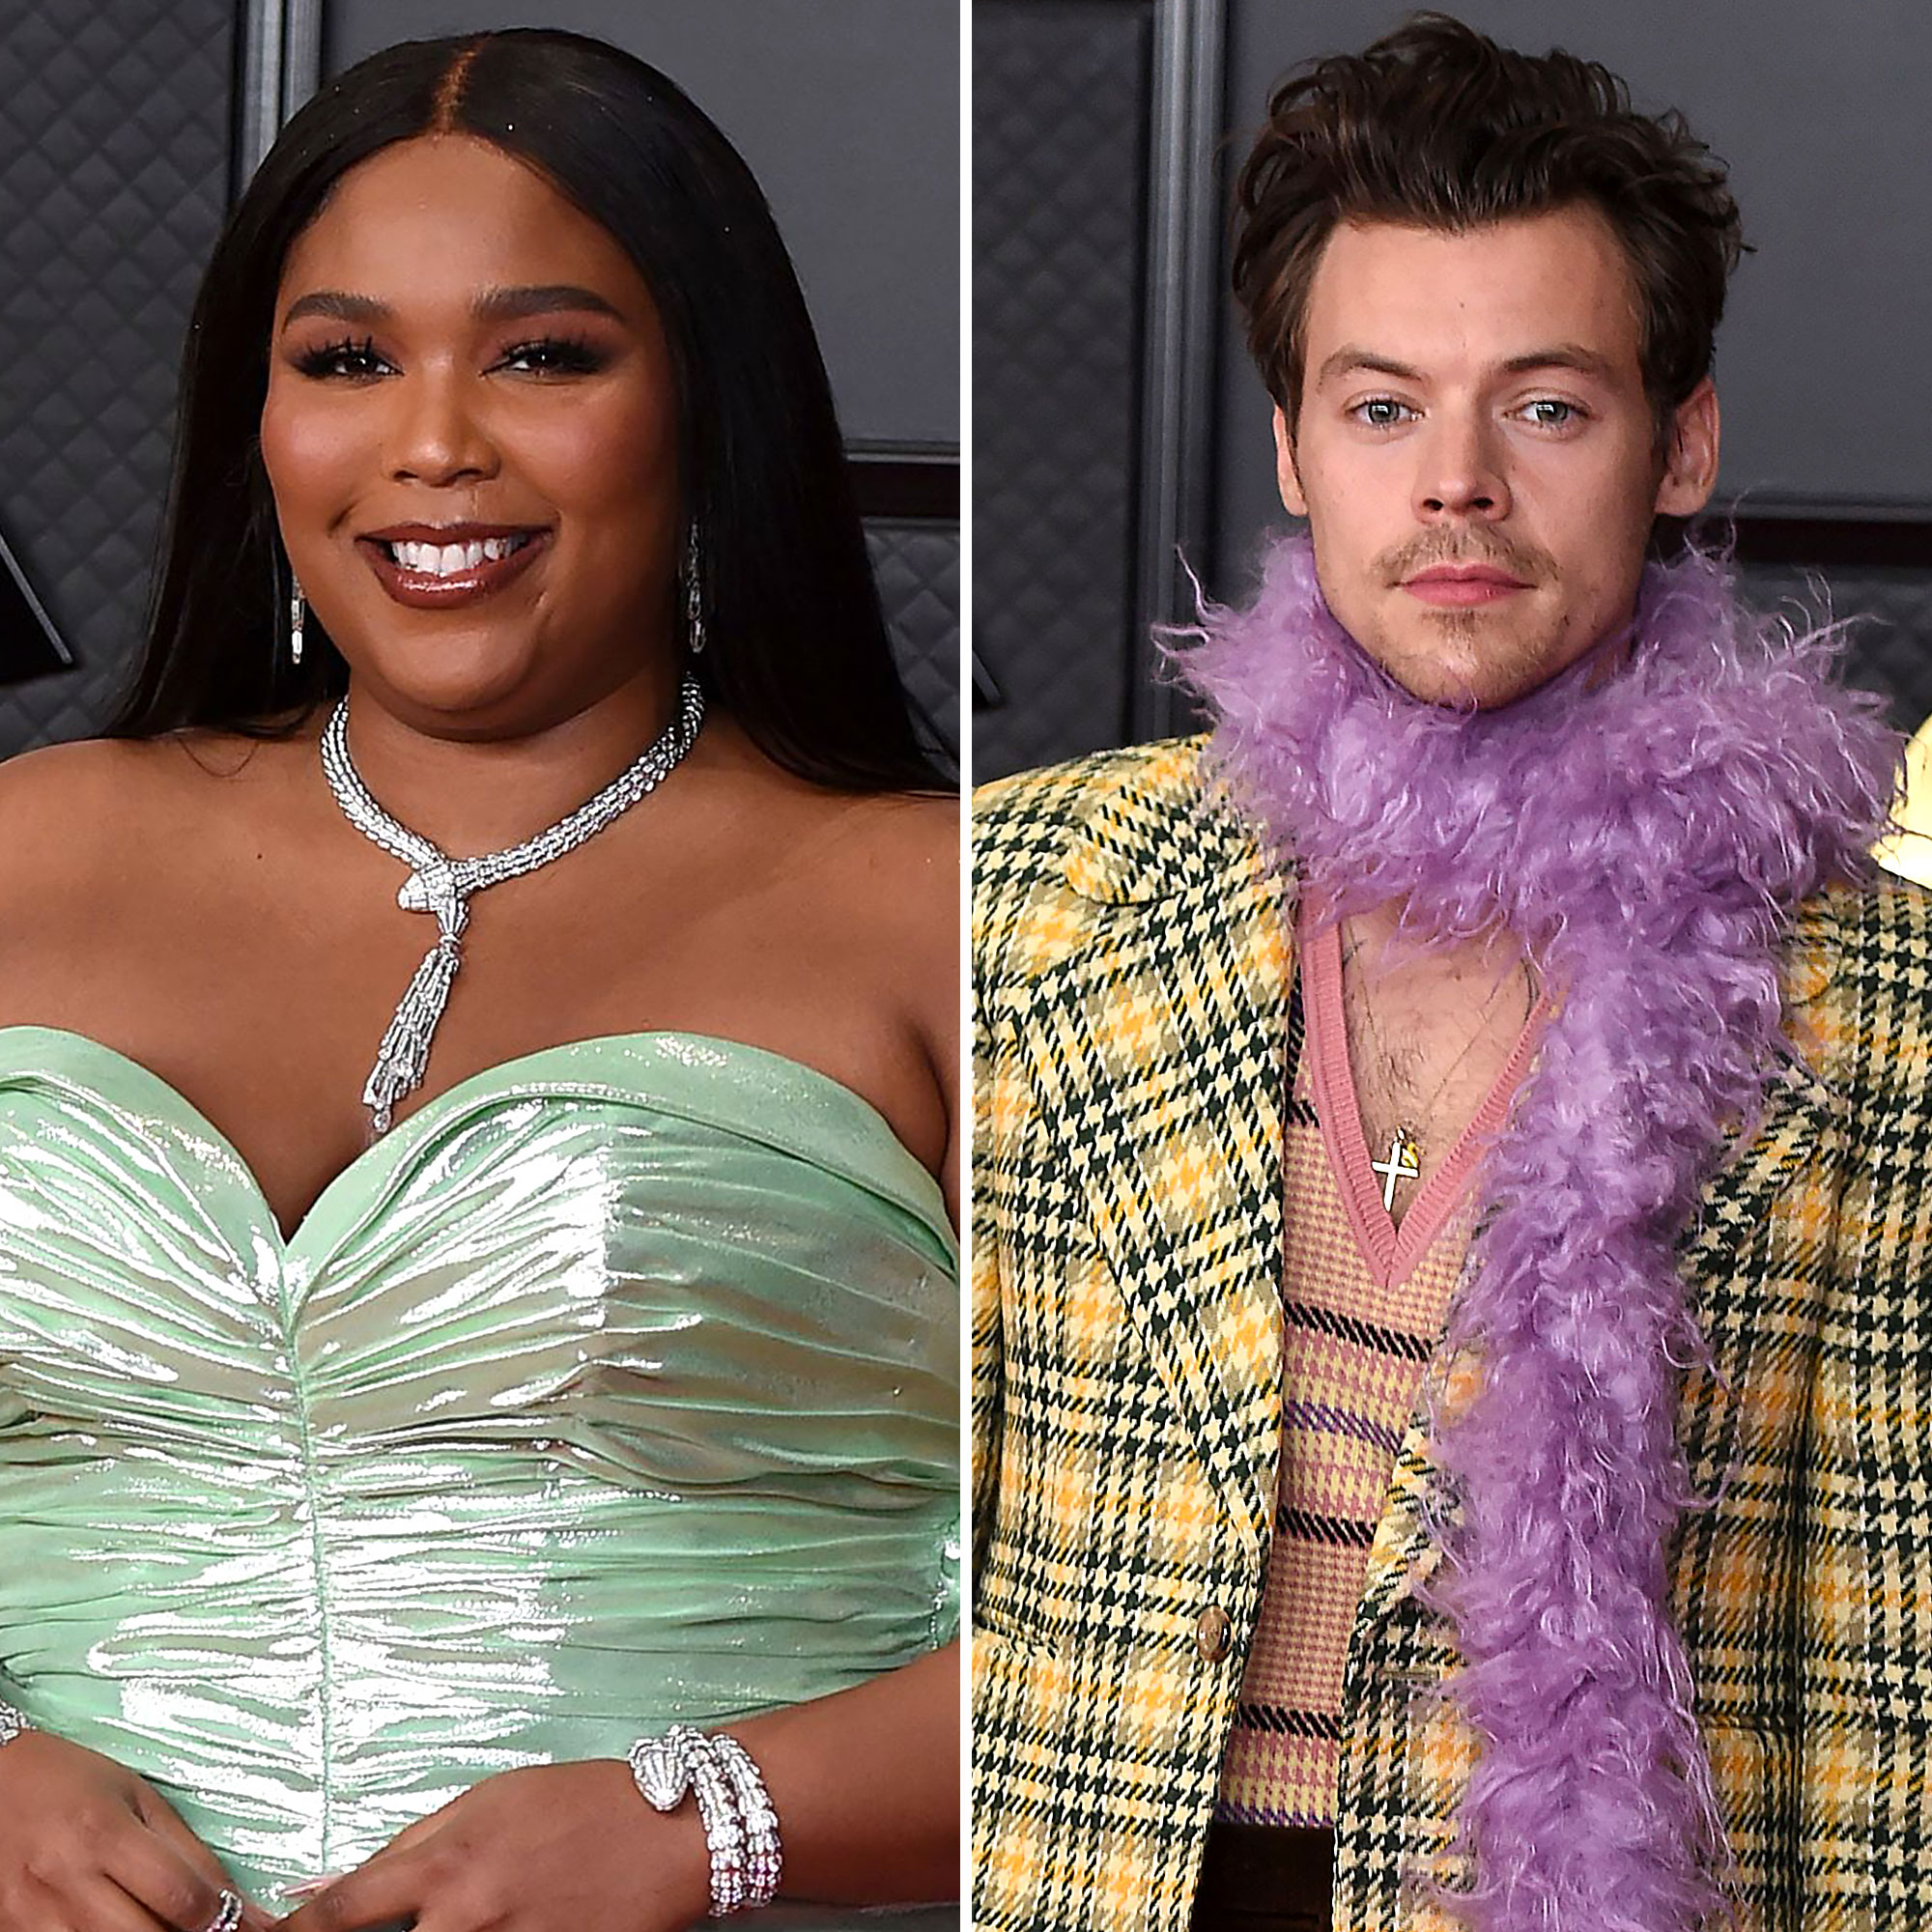 Lizzo: 12 facts about the 'Juice' singer and rapper you probably